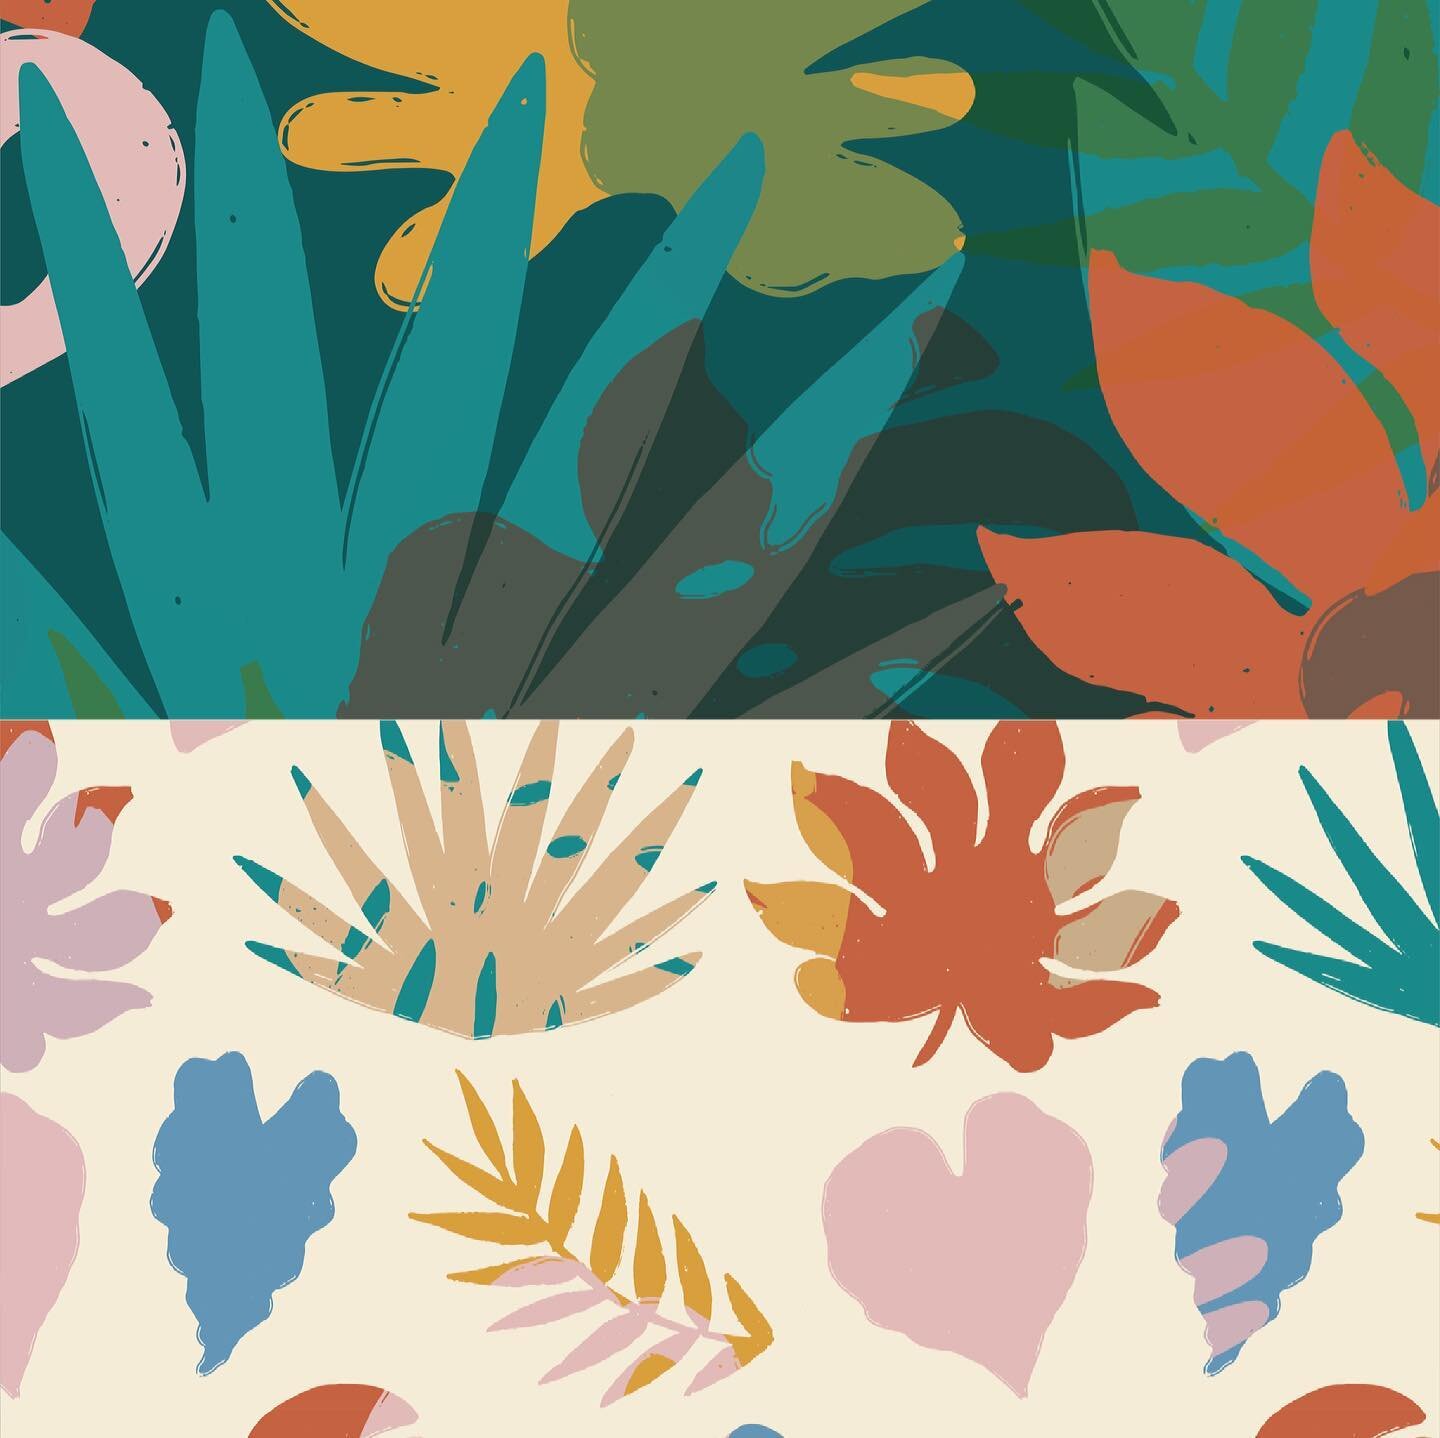 Pattern play with some plant elements 🌱 
Which one is your fav? 
.
.
.
.
.
.
.
.
.
.
.
.
.
.
.
.
.
.
.
#plantlady #planticon #plantpattern #pattern #patterndesign #patternplay #patternmaking #illustrator #illustration #plantsmakepeoplehappy #tropica